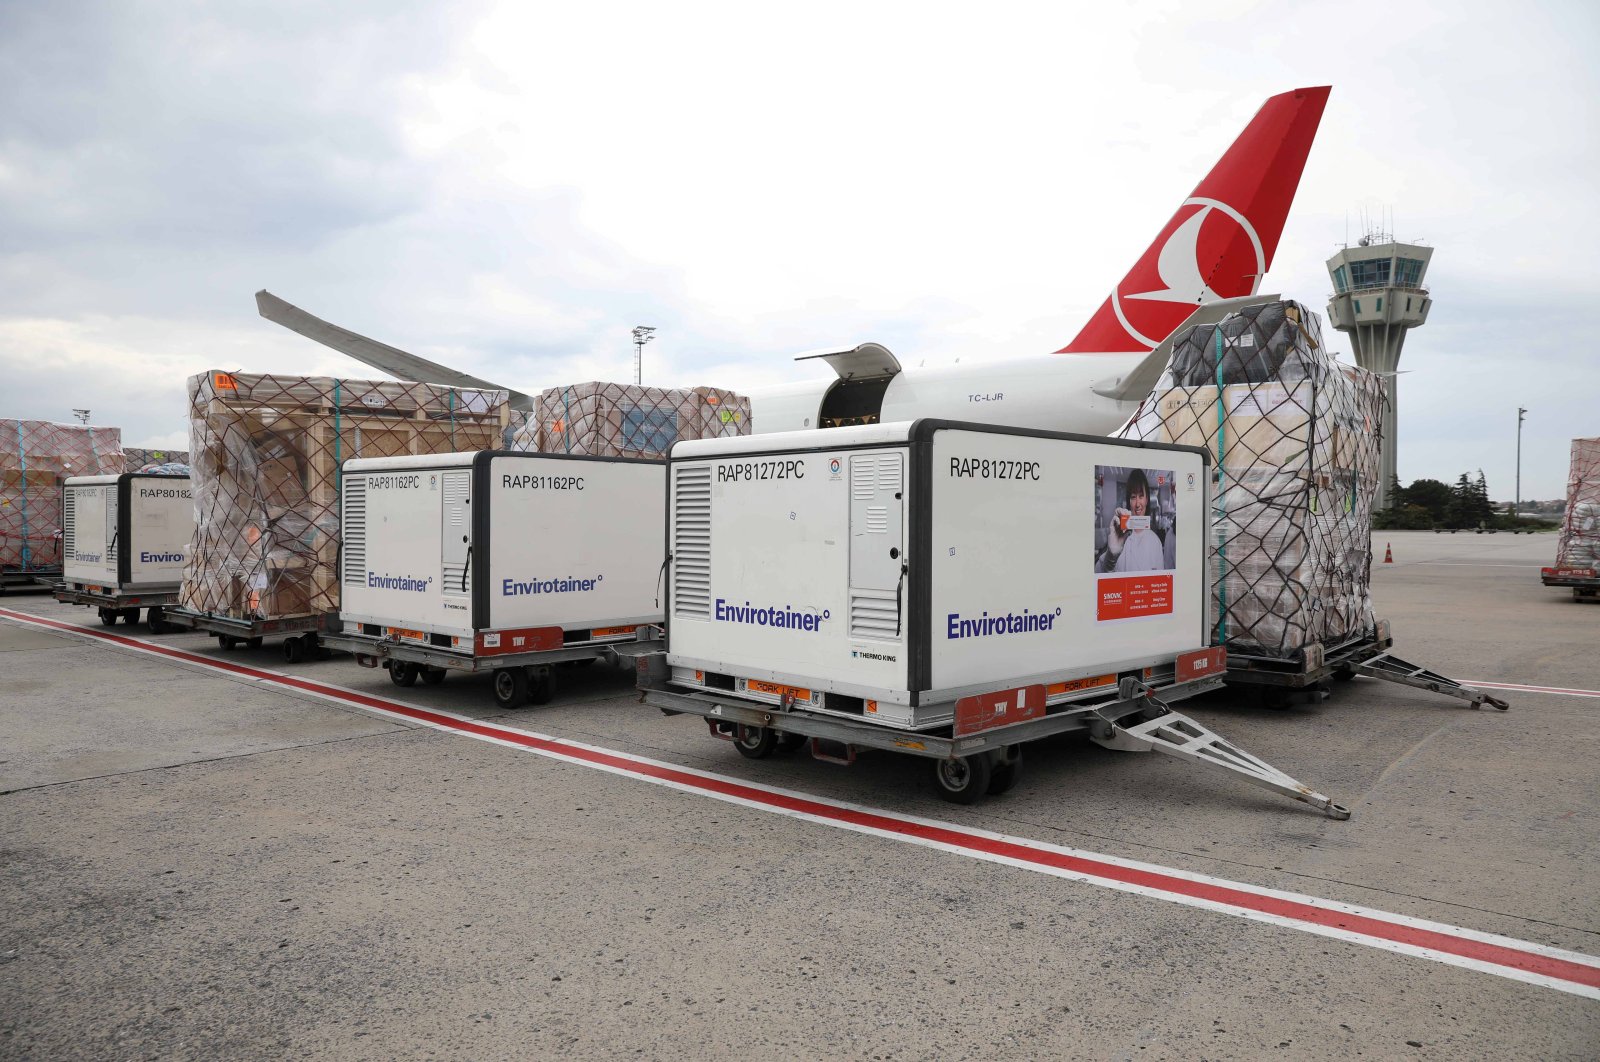 Active temperature control containers carrying China's Sinovac experimental COVID-19 vaccines are loaded onto a Turkish Cargo plane at Istanbul Airport before departing for Brazil, in Istanbul, Turkey, Nov. 18, 2020. (Photo by THY via Reuters )